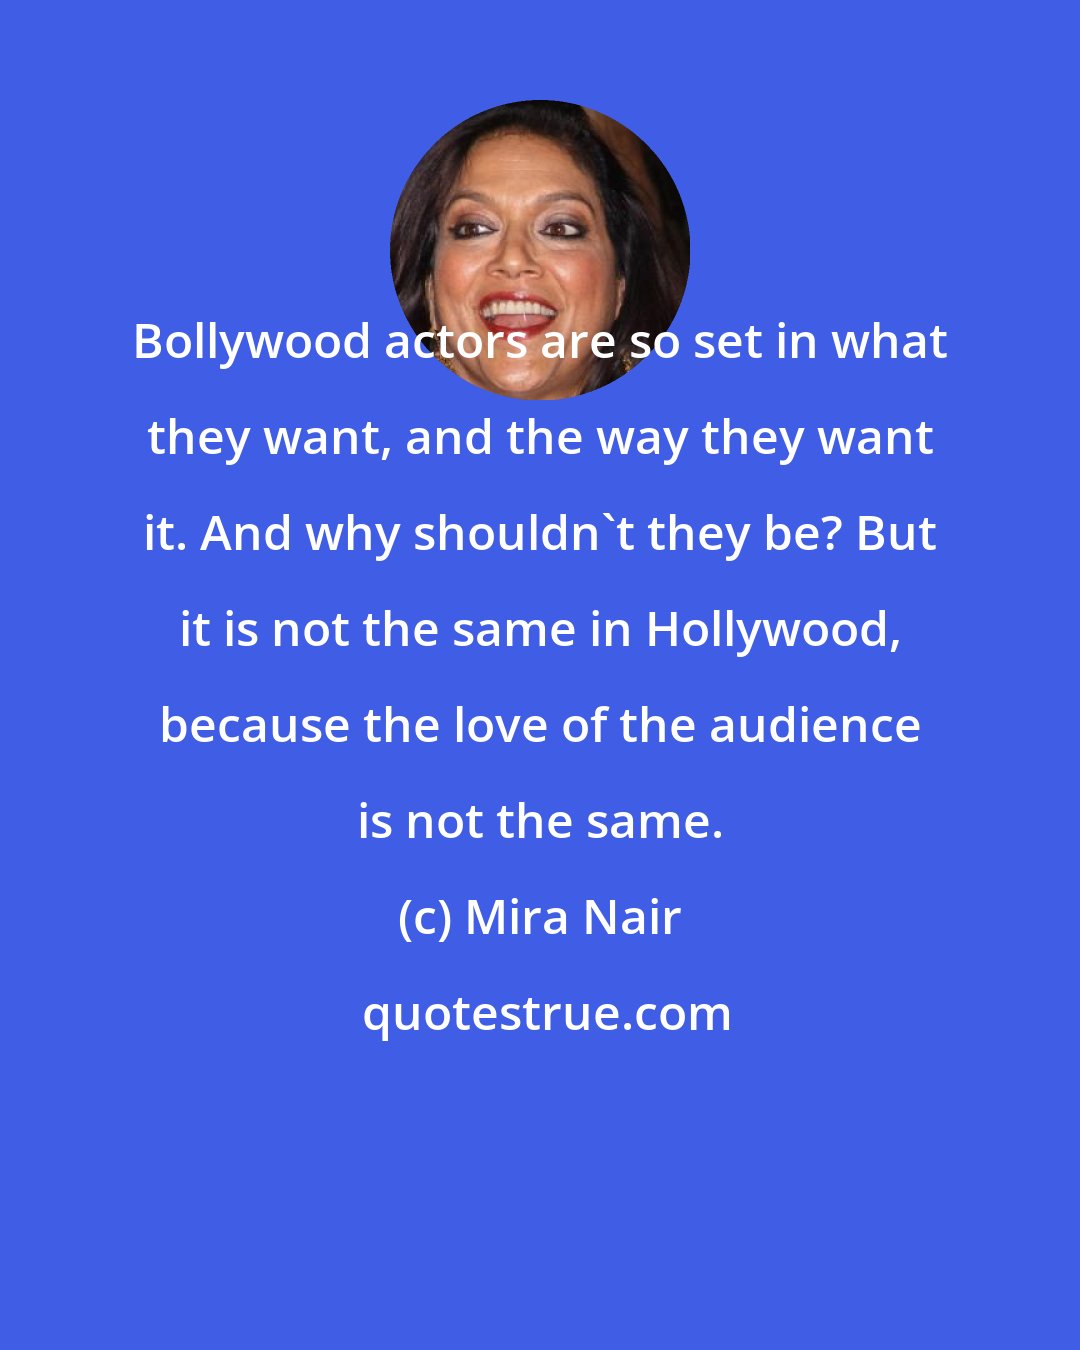 Mira Nair: Bollywood actors are so set in what they want, and the way they want it. And why shouldn't they be? But it is not the same in Hollywood, because the love of the audience is not the same.